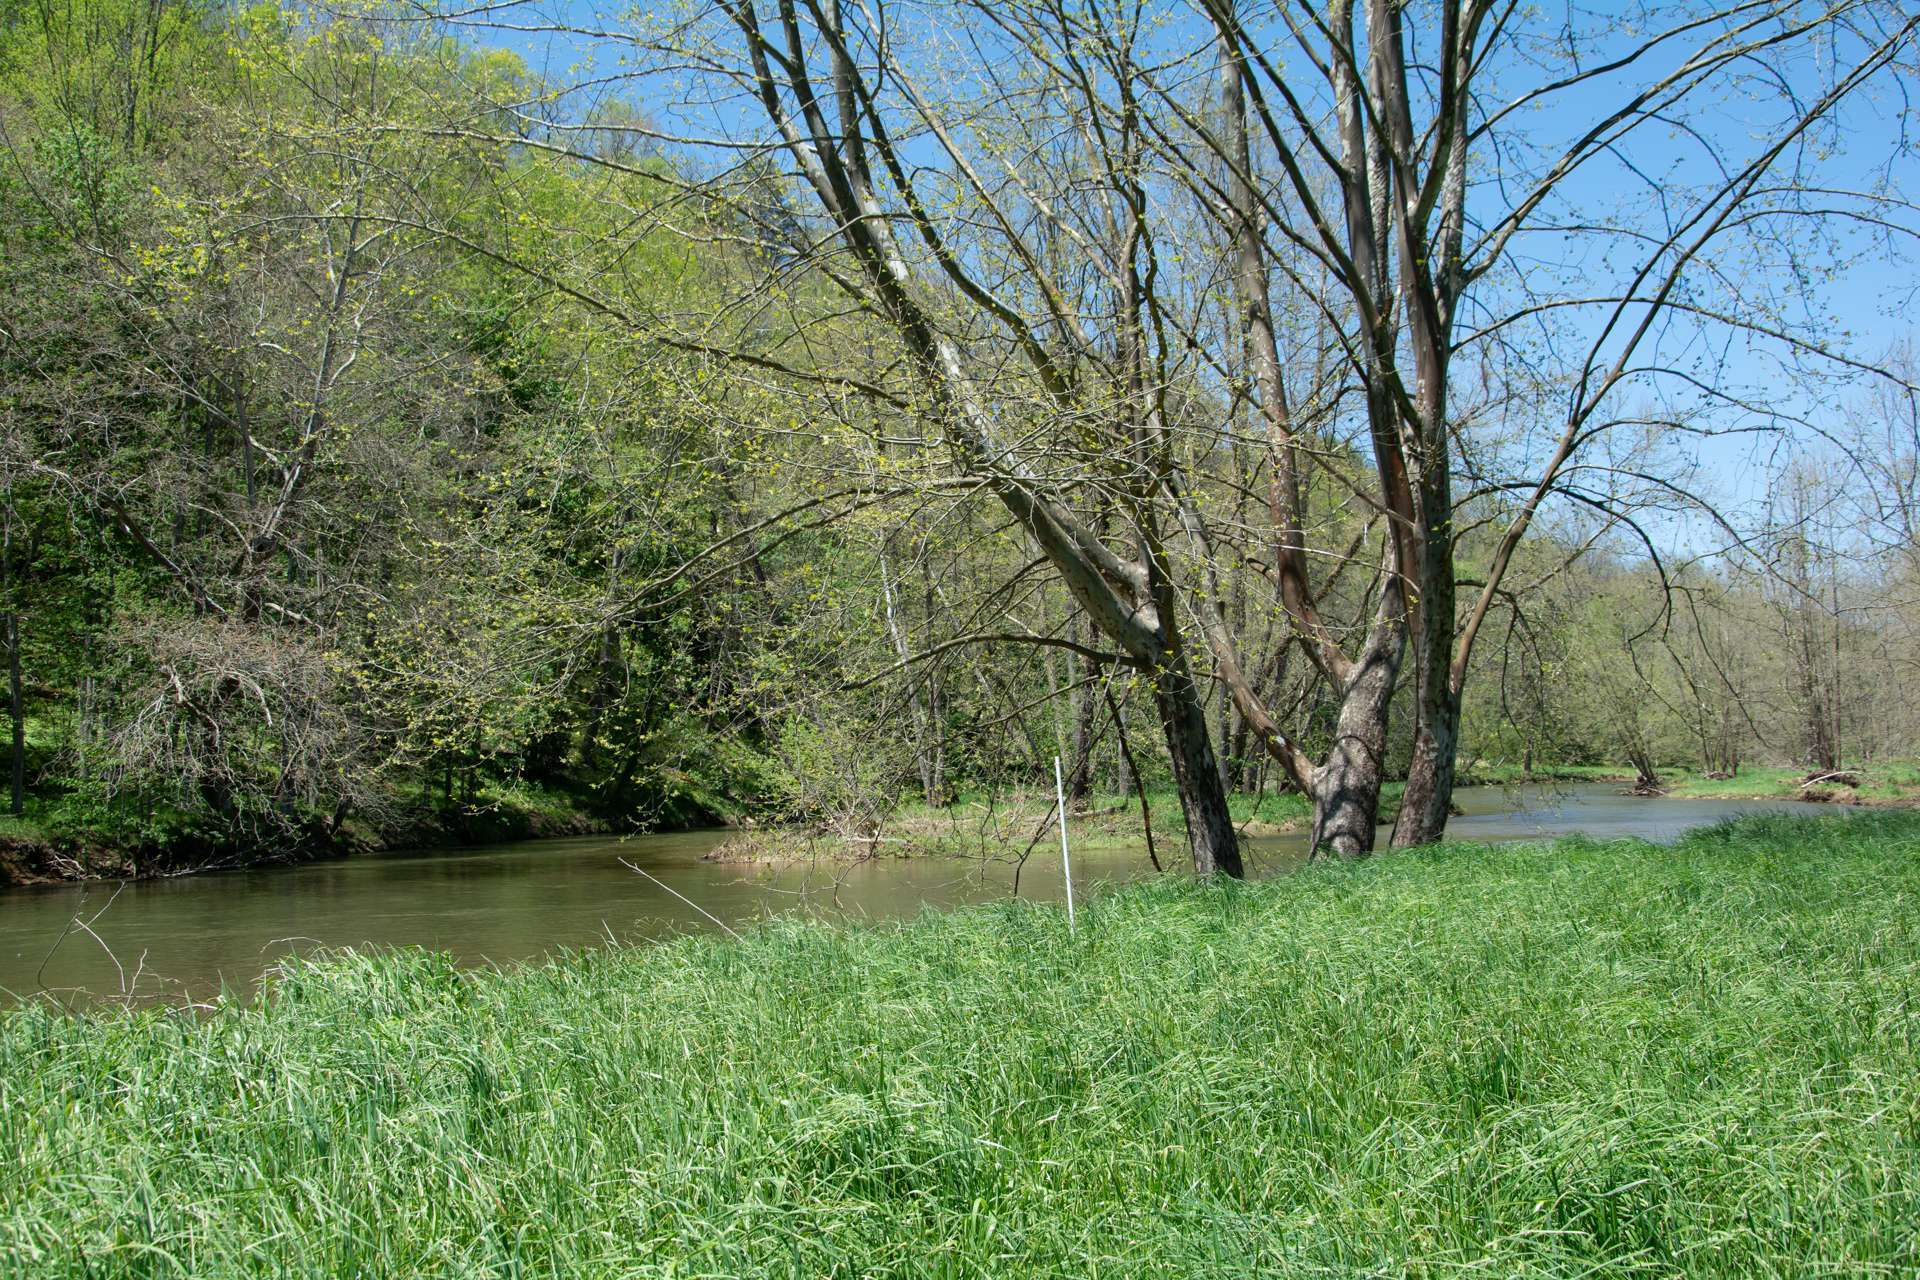 This gorgeous 8.84 acre riverfront land tract is offered at $250,000.